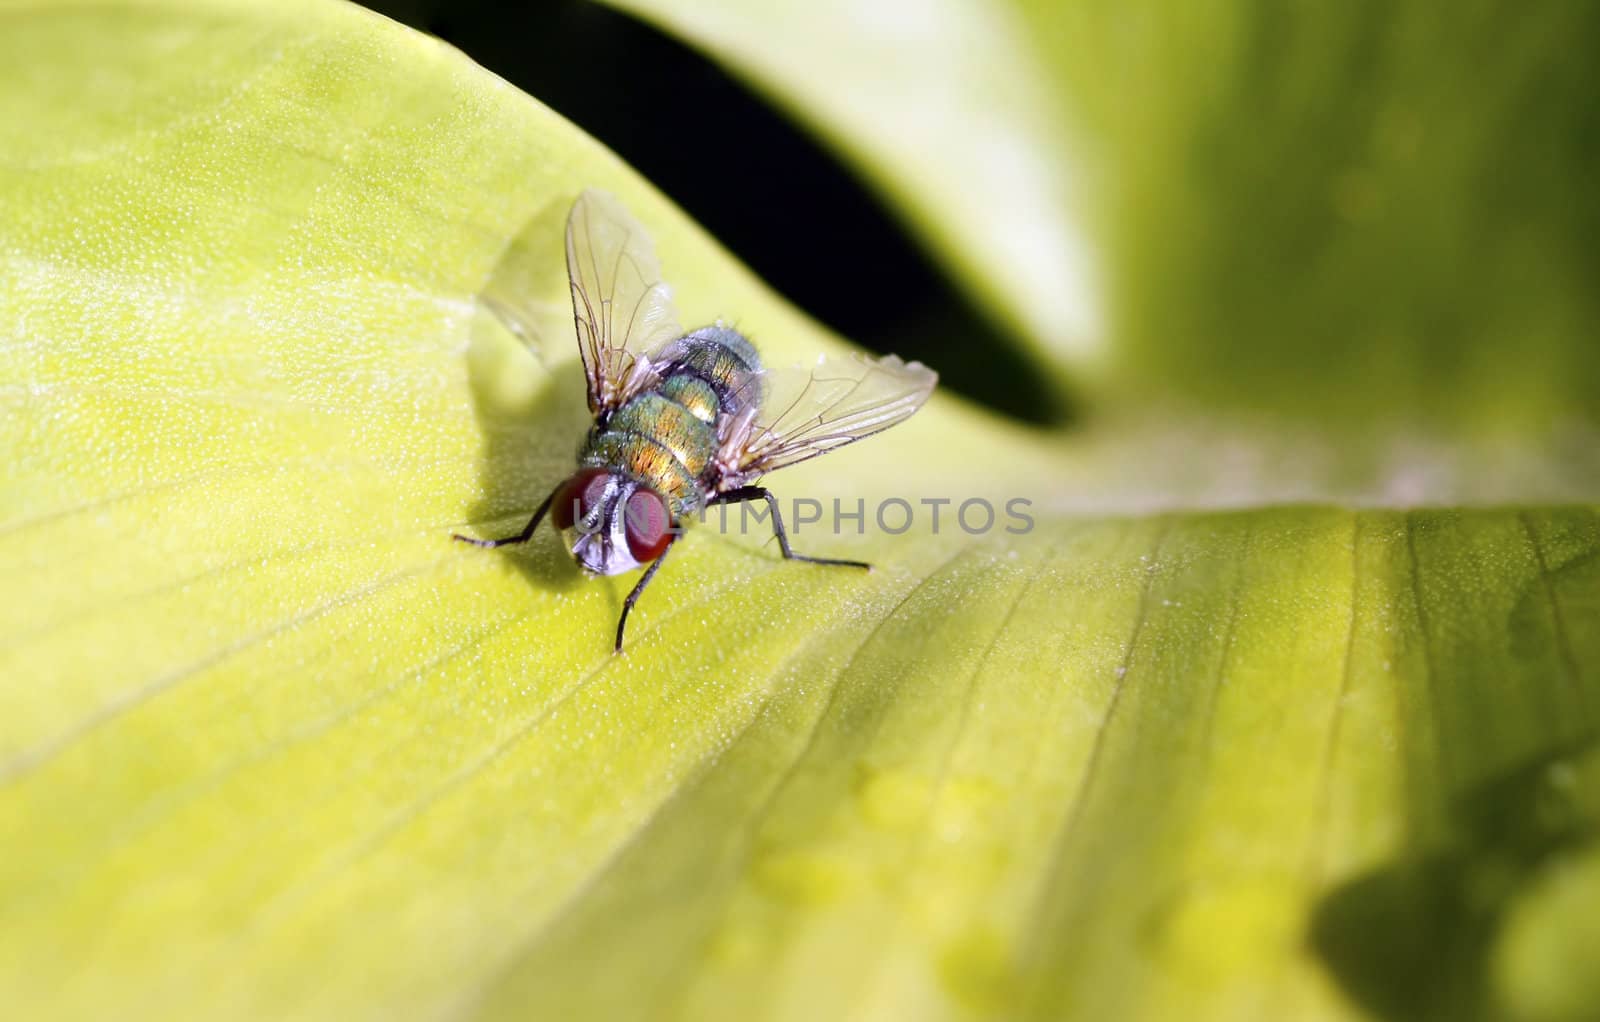 Macro - Fly by ChrisAlleaume